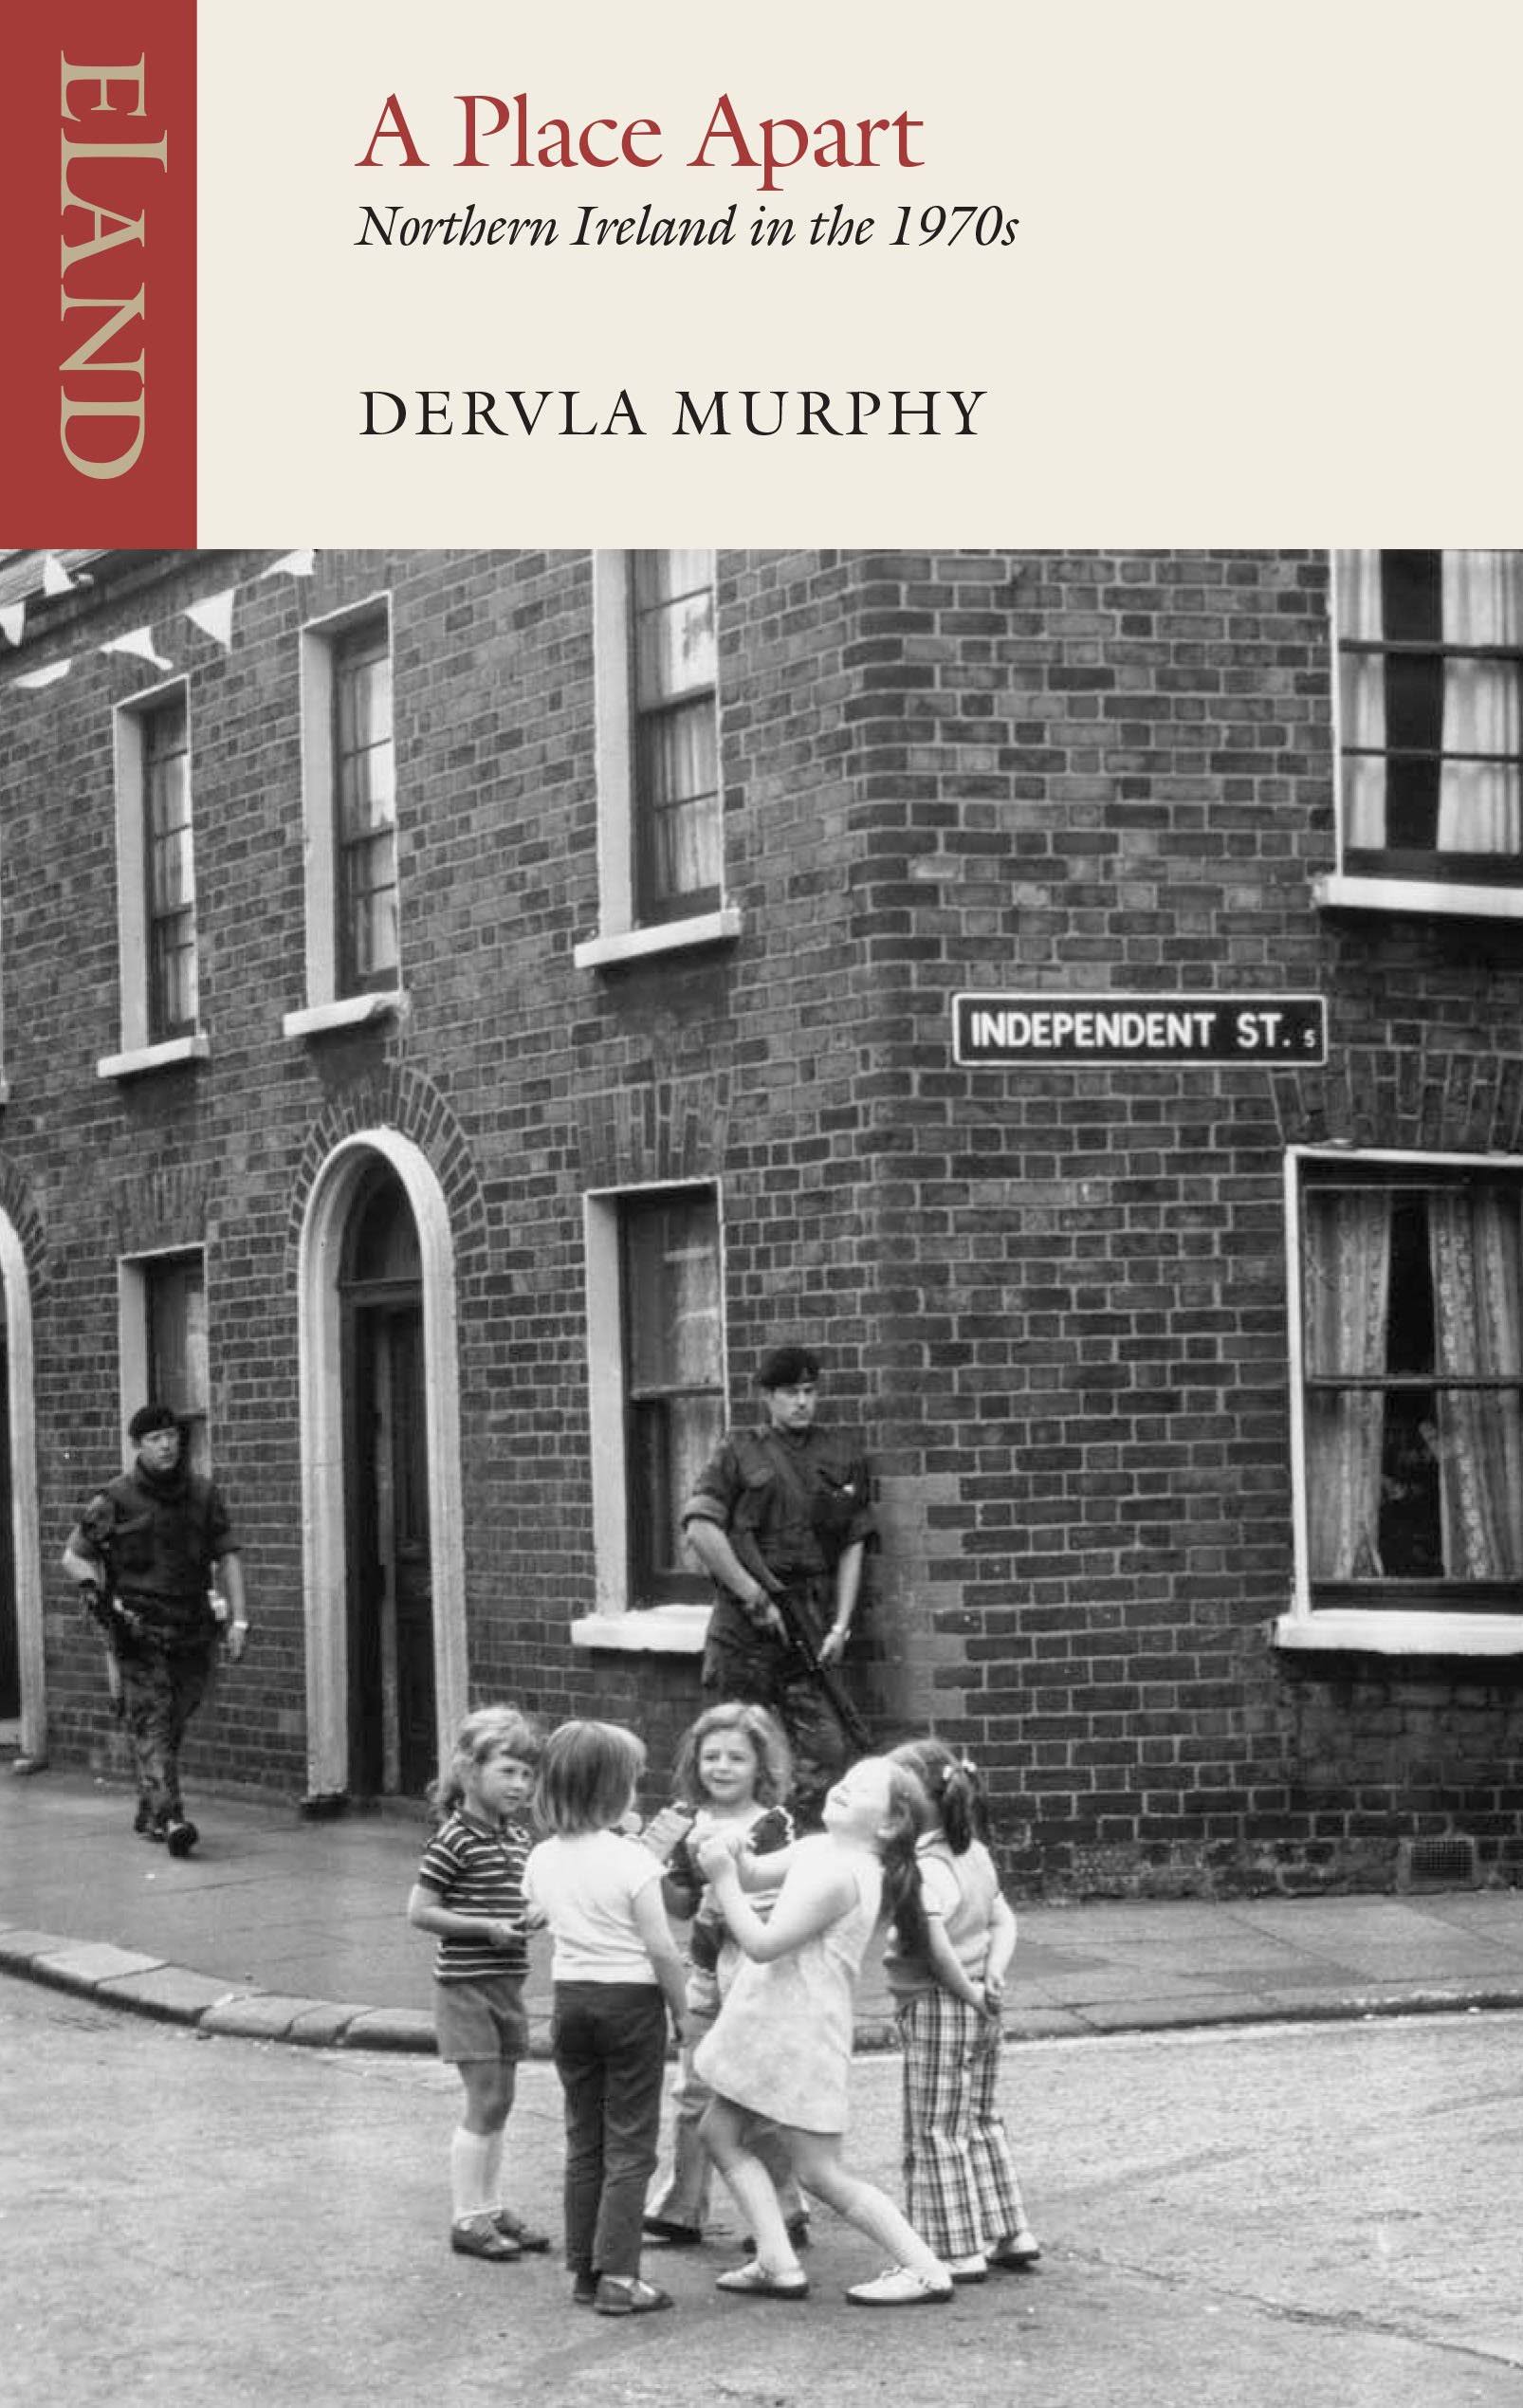 A Place Apart: Northern Ireland in the 1970s - Dervla Murphy